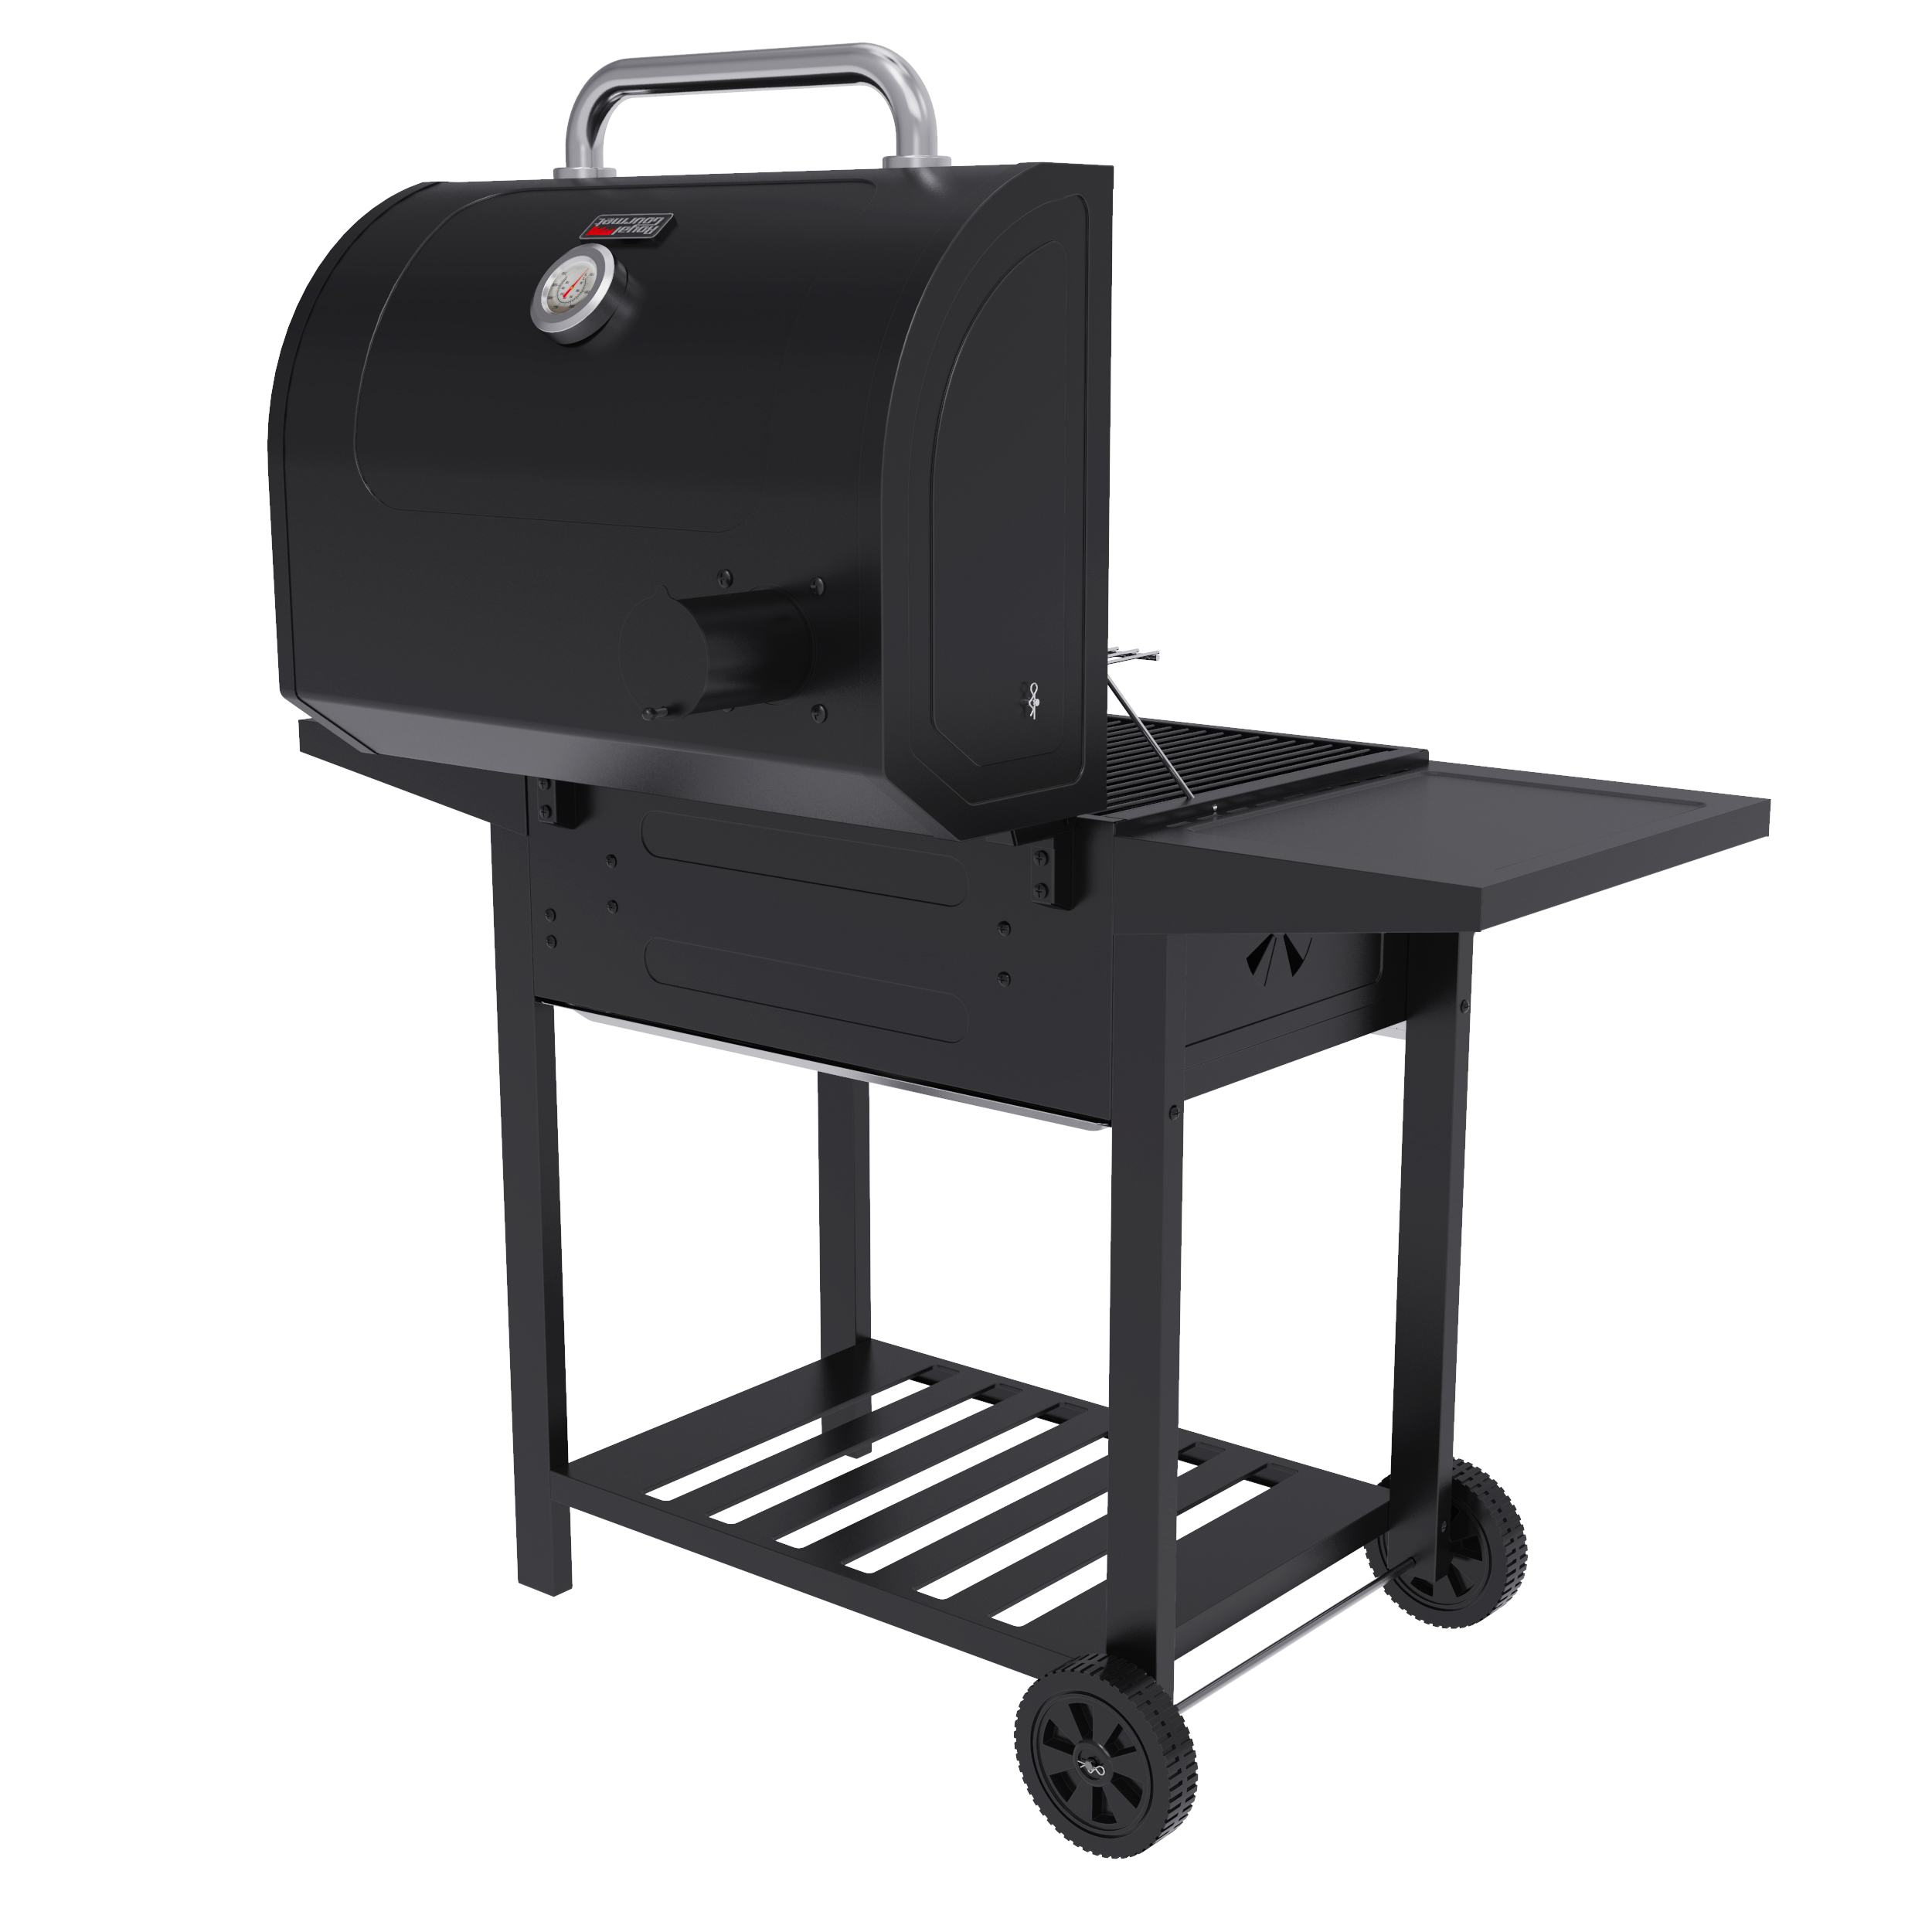 24 cd1824a charcoal grill with side shelves black royal gourmet Royal Gourmet Cd1824a 24 Inch Charcoal Grill 598 Square Inches 6 Adjustable Heights Bbq Outdoor Picnic Camping Patio Backyard Cooking Black Walmart Com Walmart Com